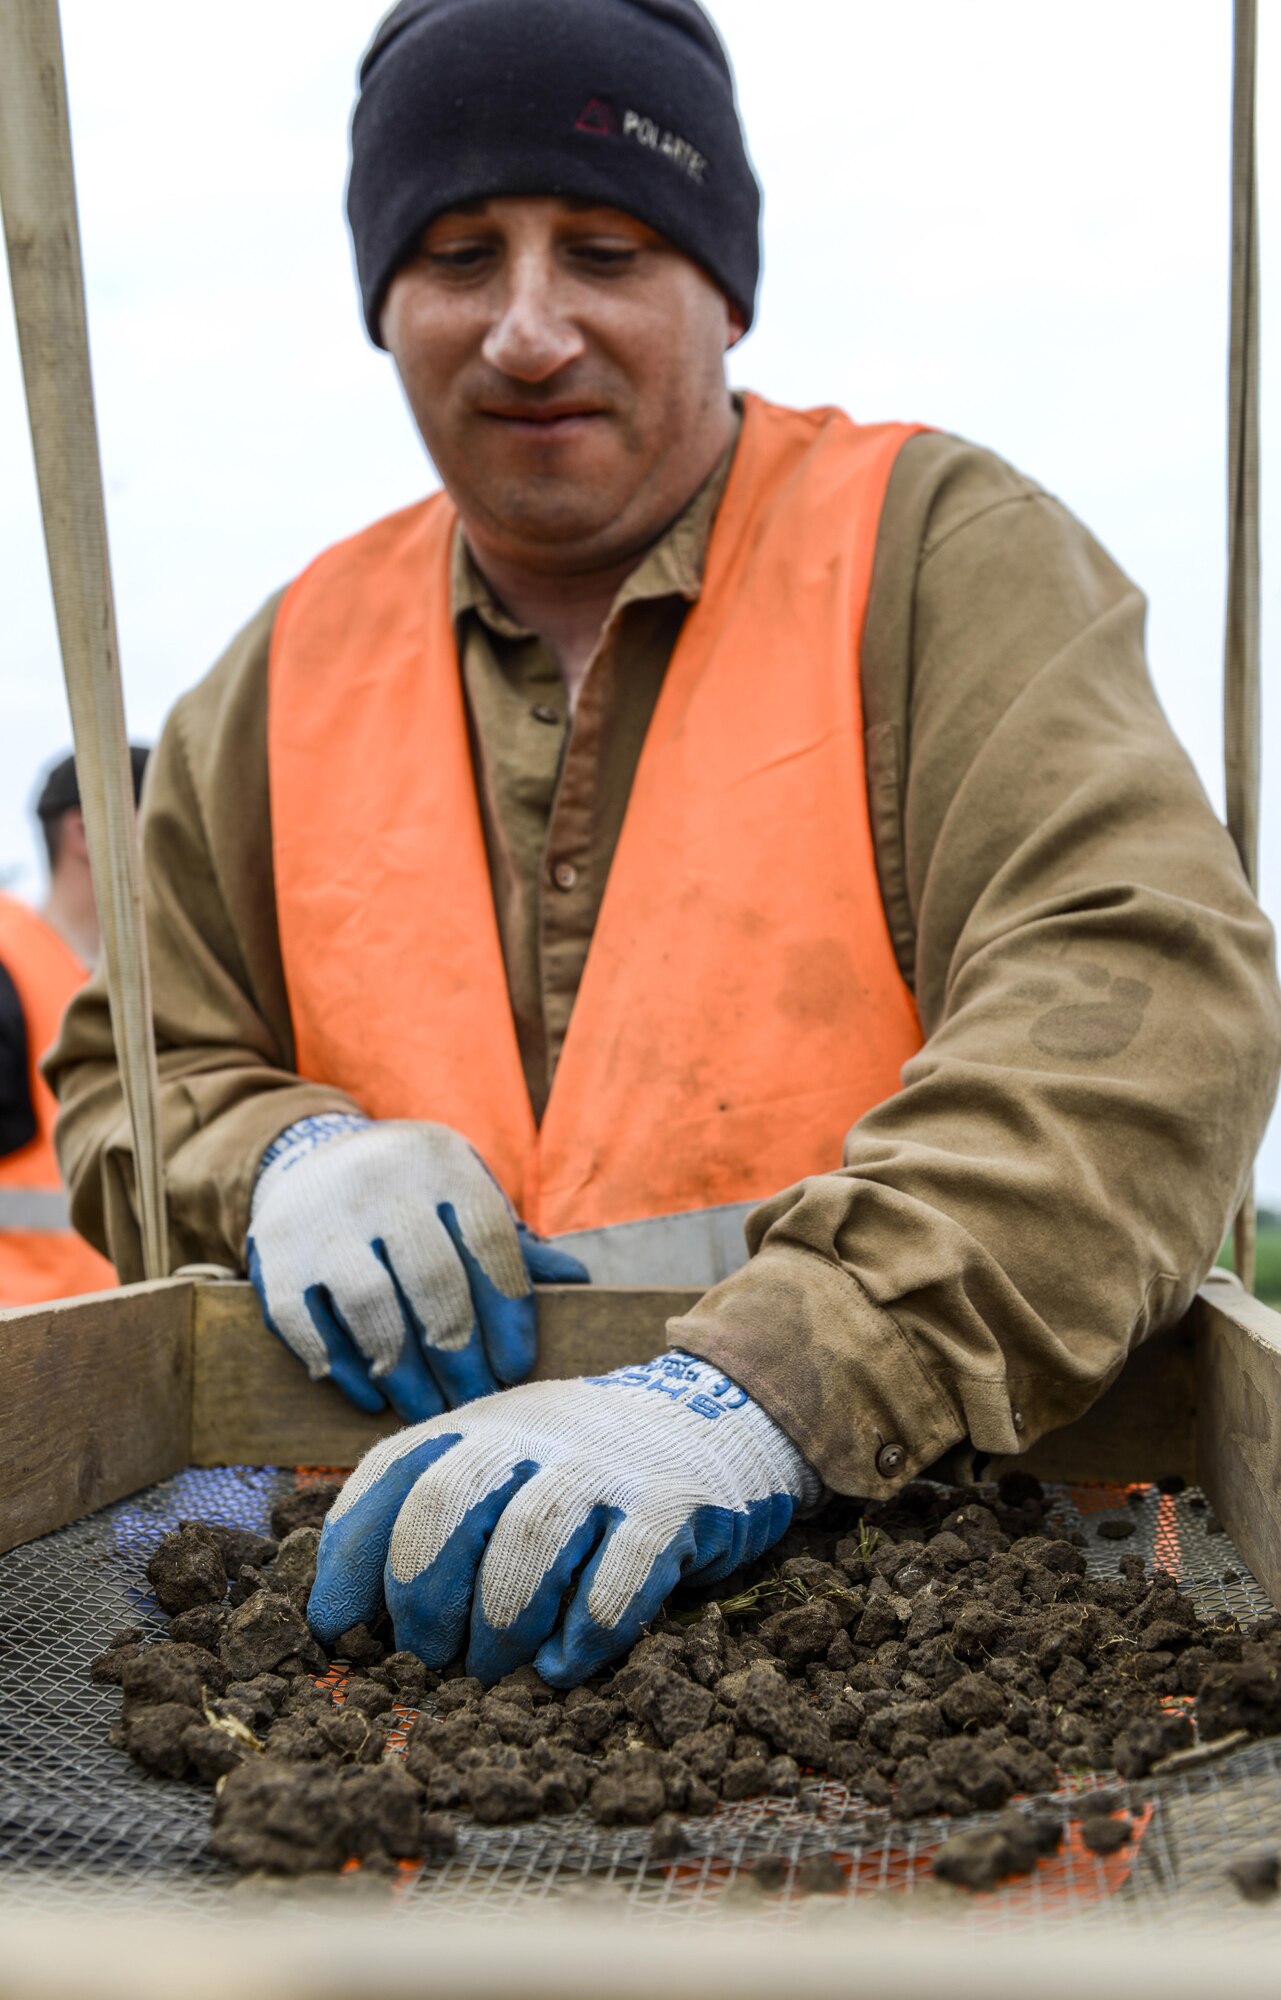 U.S. Army Sgt. 1st Class Joseph Stoner, NCO in charge of Mortuary Affairs, 16th Sustainment Brigade, 21st Theater Sustainment Command, screens a bucket of dirt at a recovery site in eastern Germany, May 18, 2016. As an augmentee of the Defense POW/MIA Accounting Agency, Stoner was tasked to help search for personnel who went missing in action from World War II. (U.S. Air Force photo/Staff Sgt. Timothy Moore)